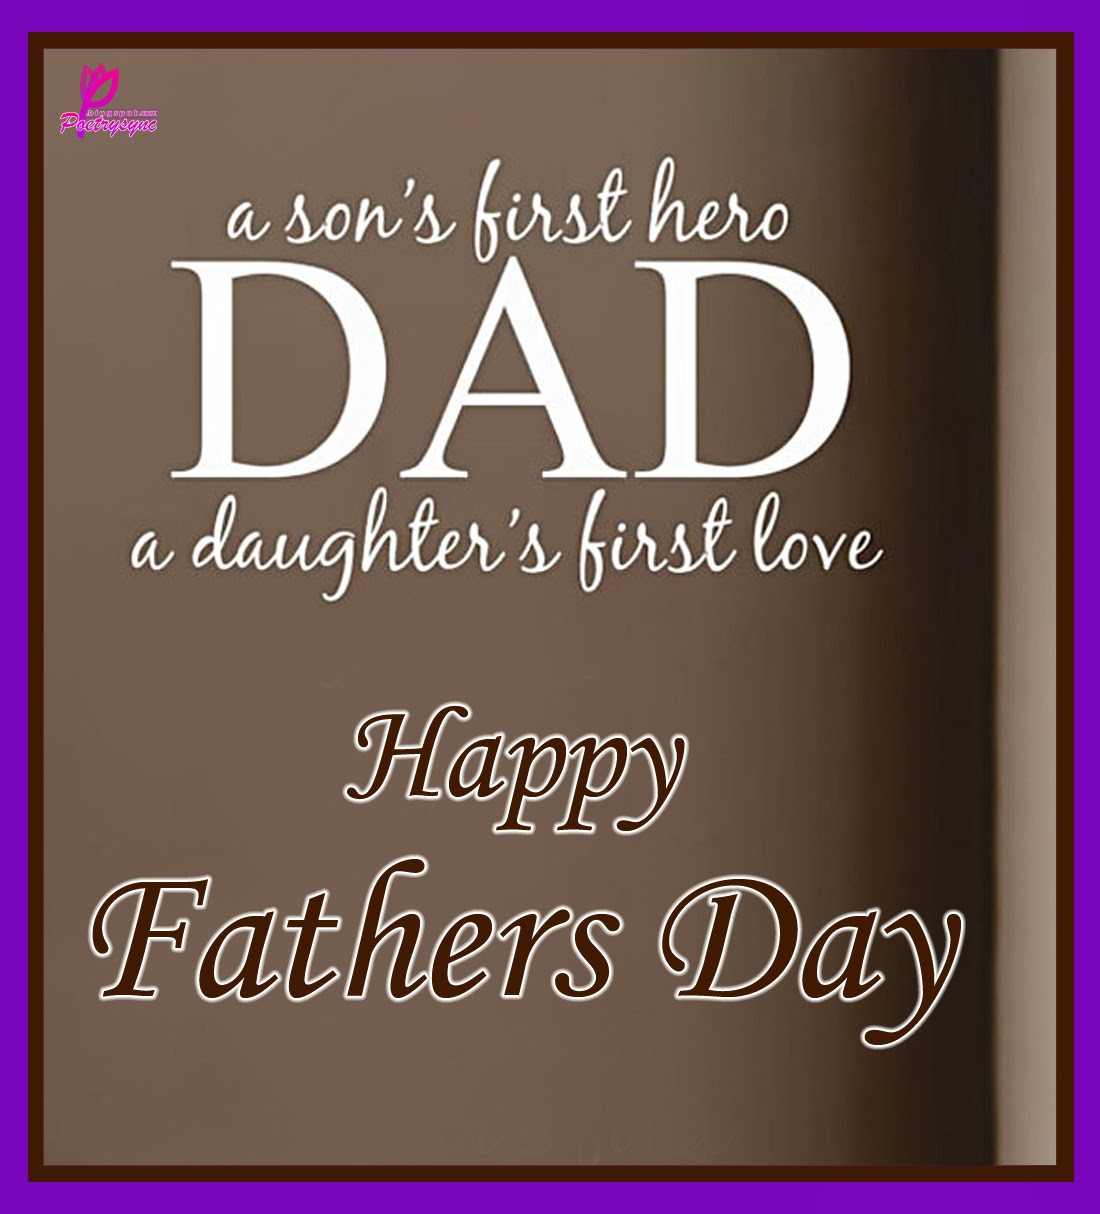 Fathers Day Quote
 Fathers Day 2015 Poems and Quotes